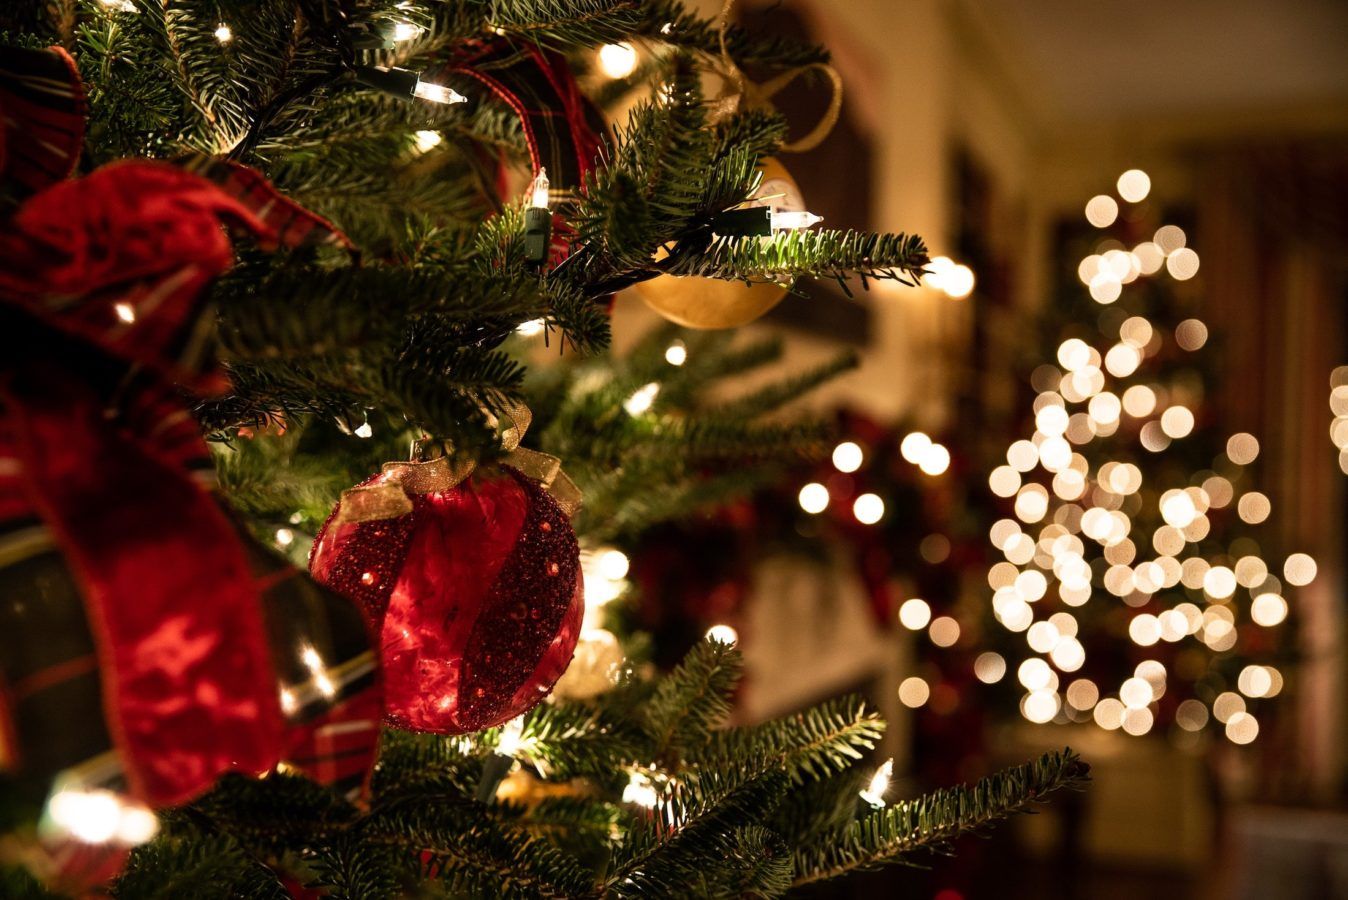 Here’s when you should take down your Christmas tree, according to a historian